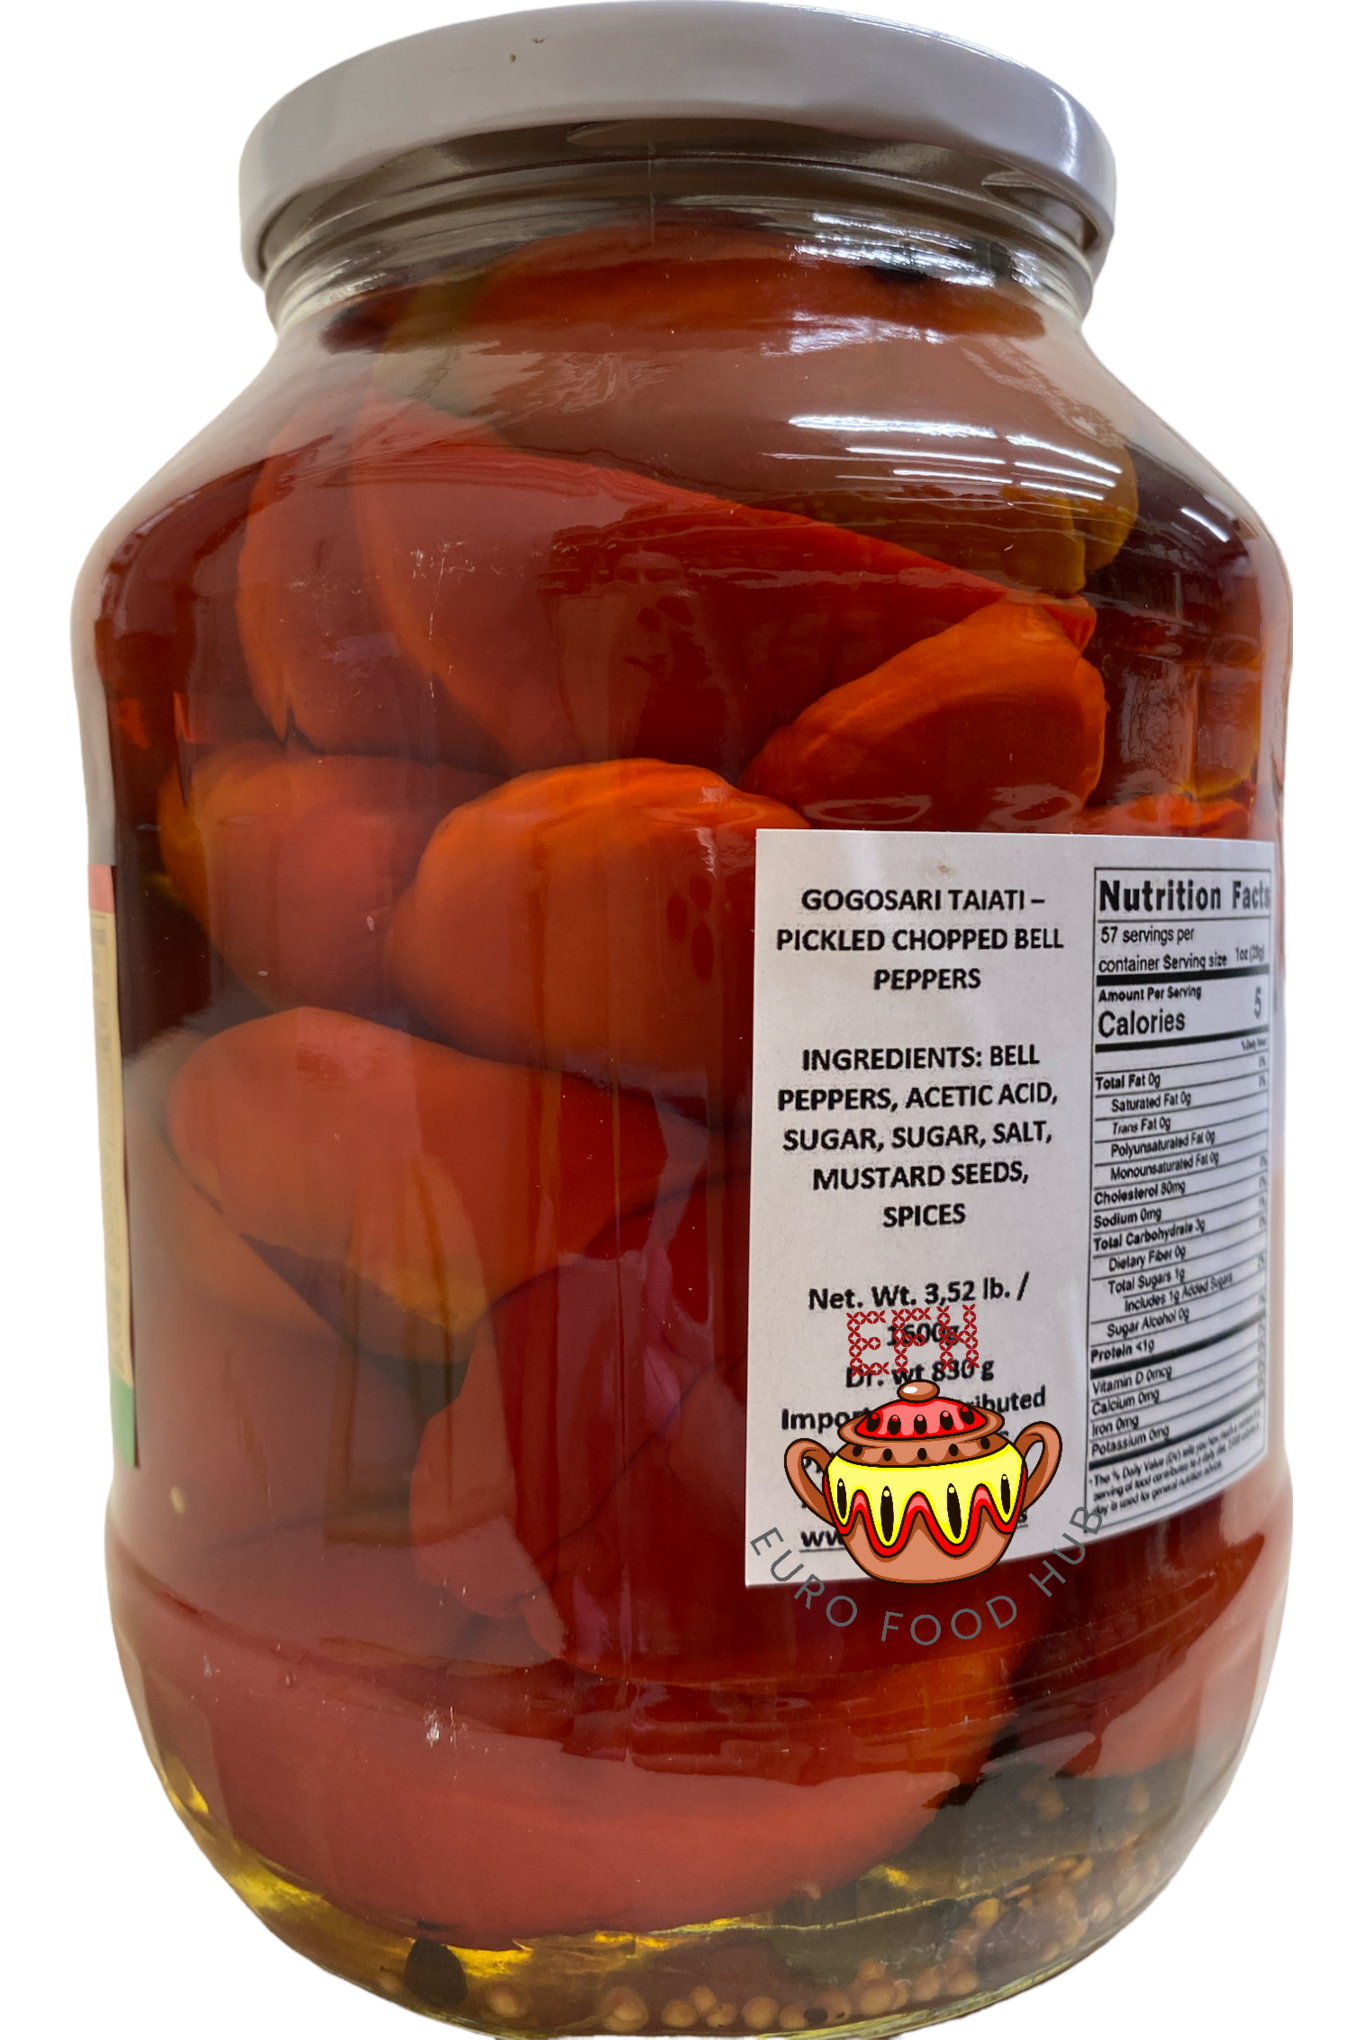 Pickled Chopped Bell Peppers - Conservfruct - GOGOSARI TAIATI 1.6 kg